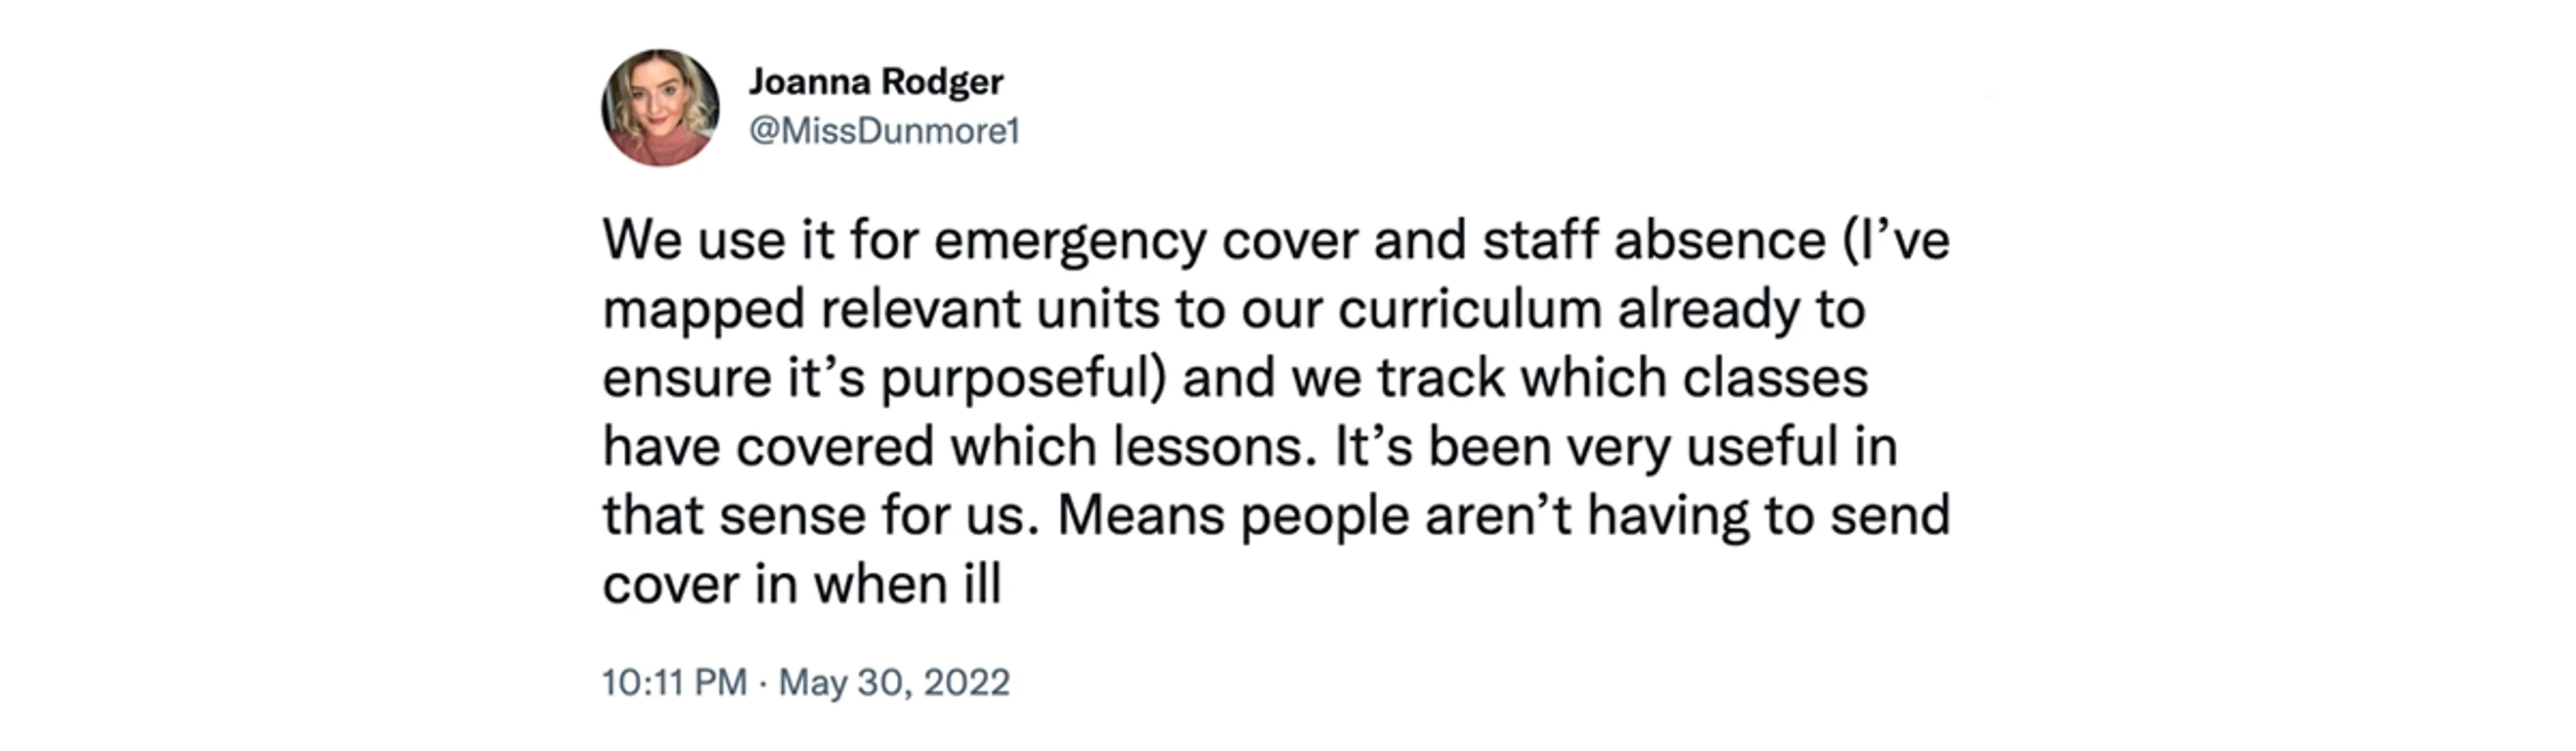 Screenshot of tweet from @MissDunmore1 at 10:11pm 30 May 2022, saying "We use it for emergency cover and staff absence (I’ve mapped relevant units to our curriculum already to ensure it’s purposeful) and we track which classes have covered which lessons. It’s been very useful in that sense for us. Means people aren’t having to send cover in when ill"